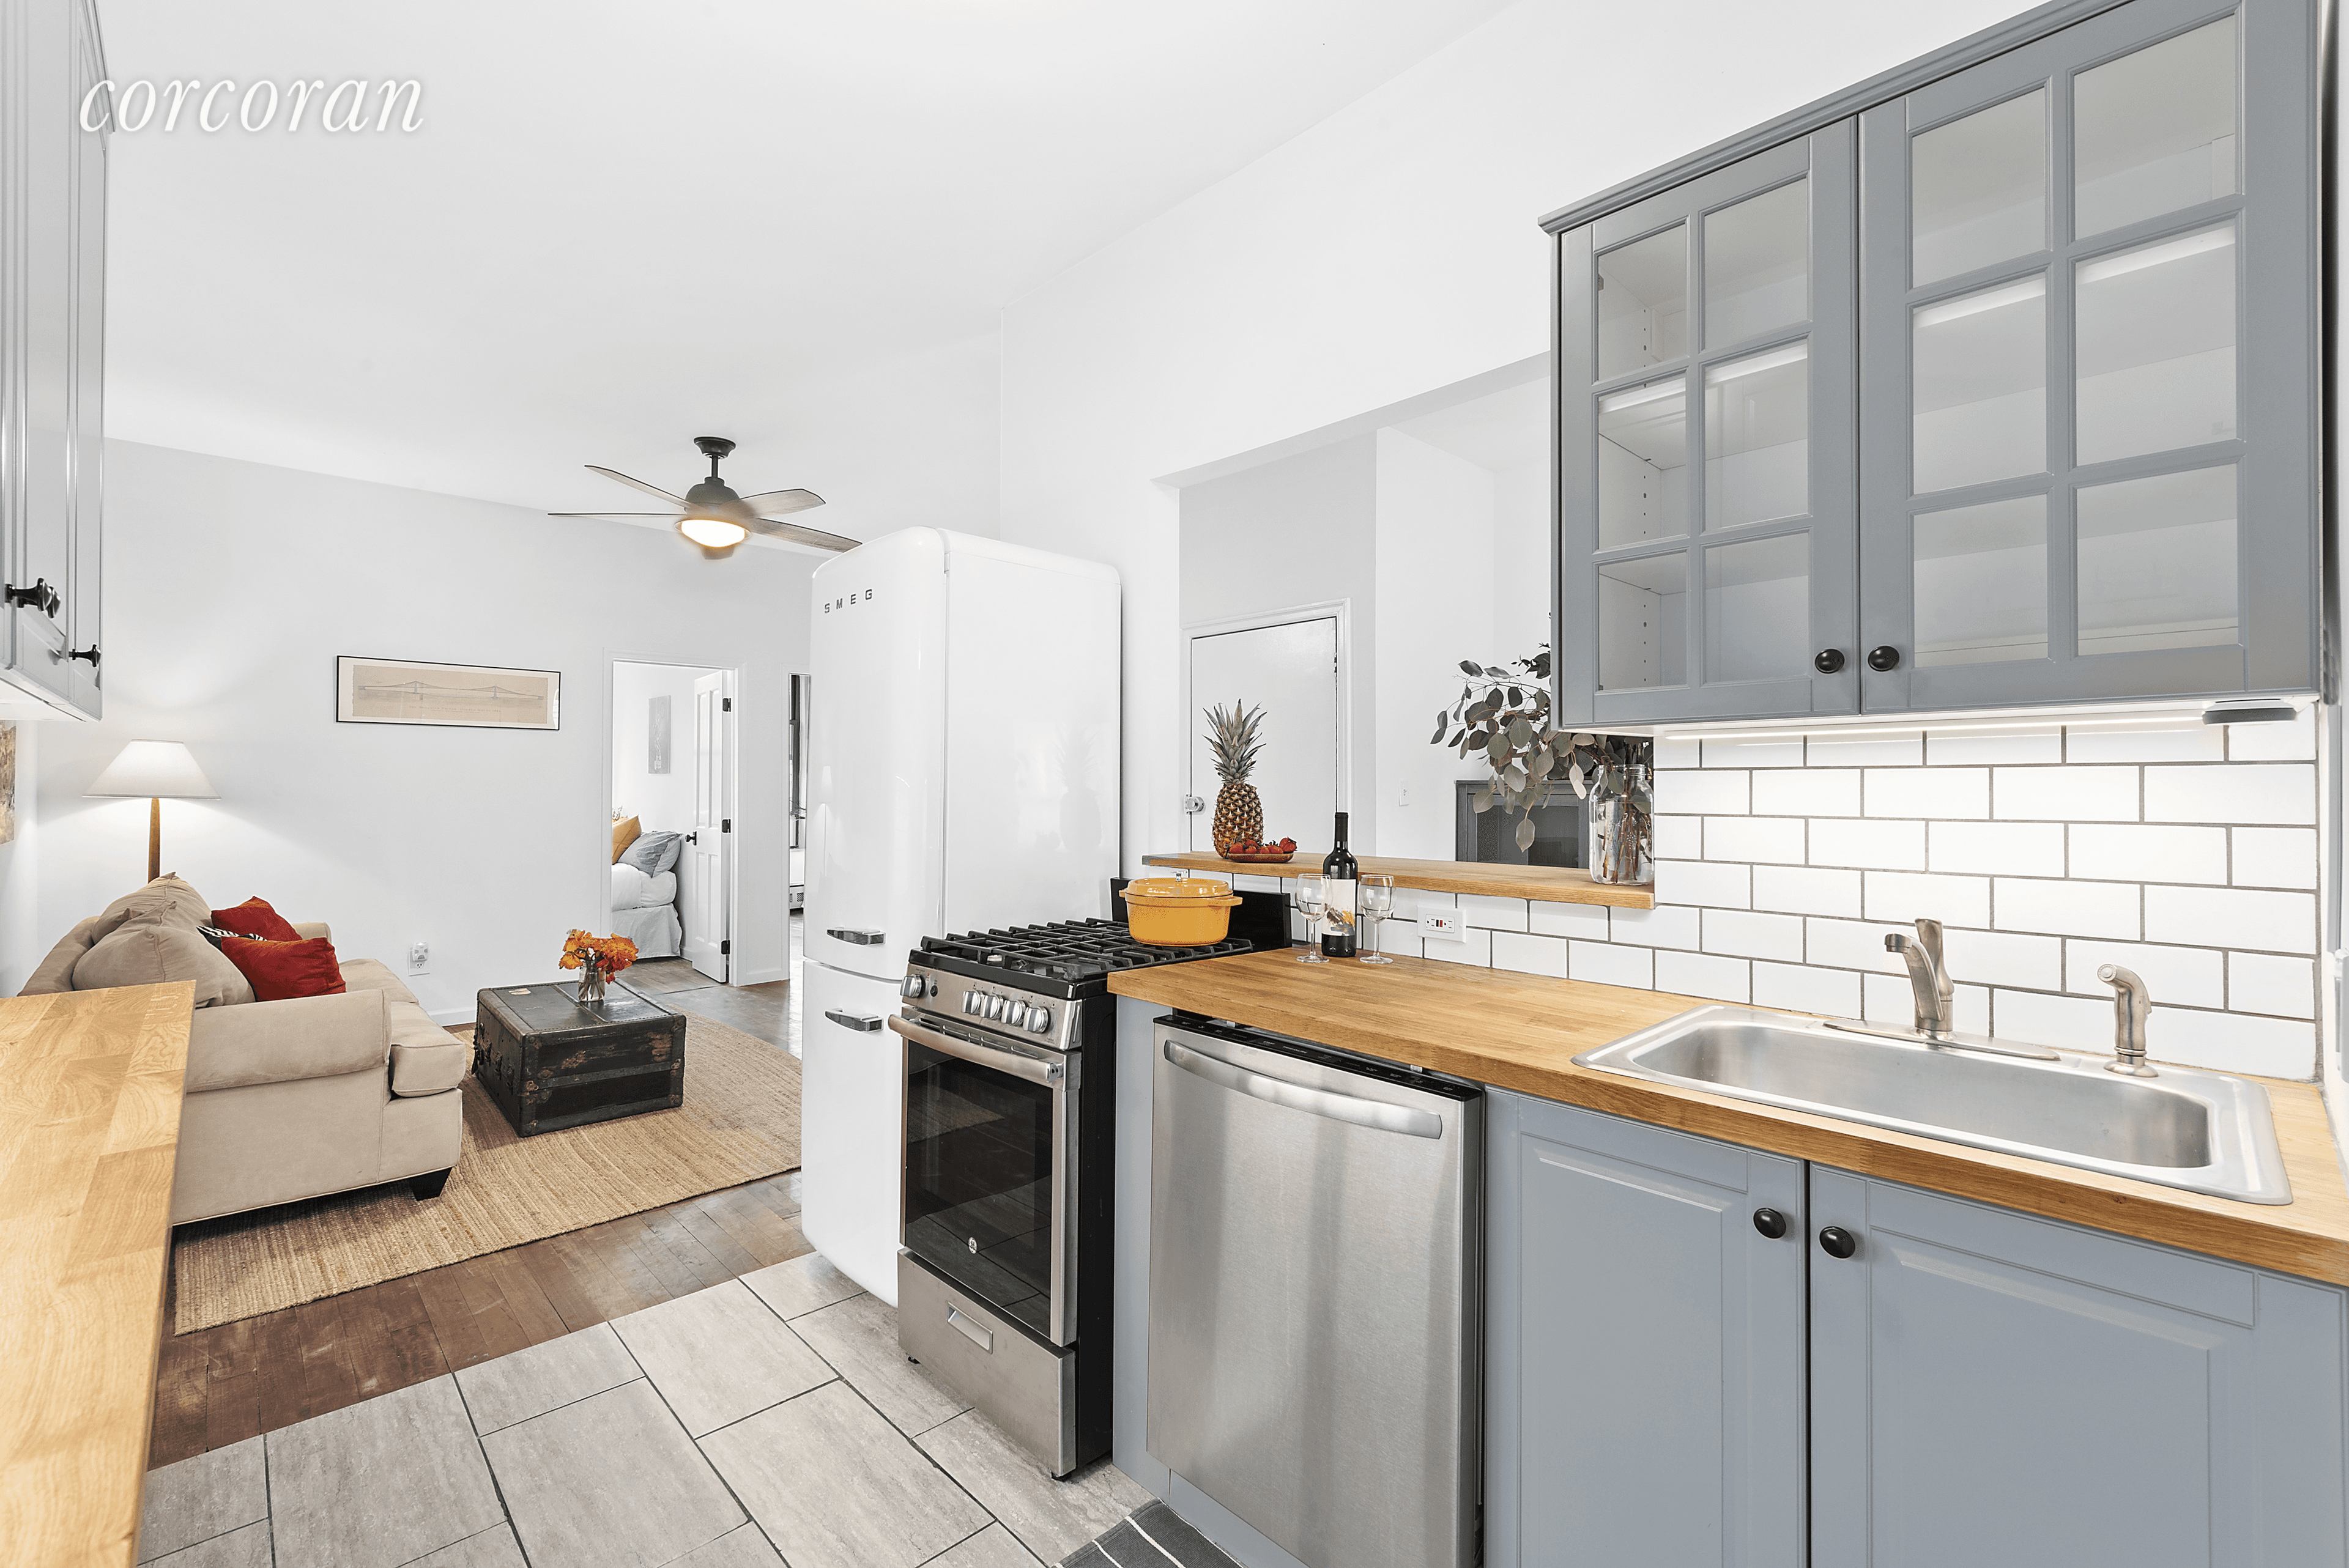 No Fee ! Move right into this newly renovated 3 bed 1 bath home at 535 Kosciuskzo Street in prime Bed Stuy Brooklyn.